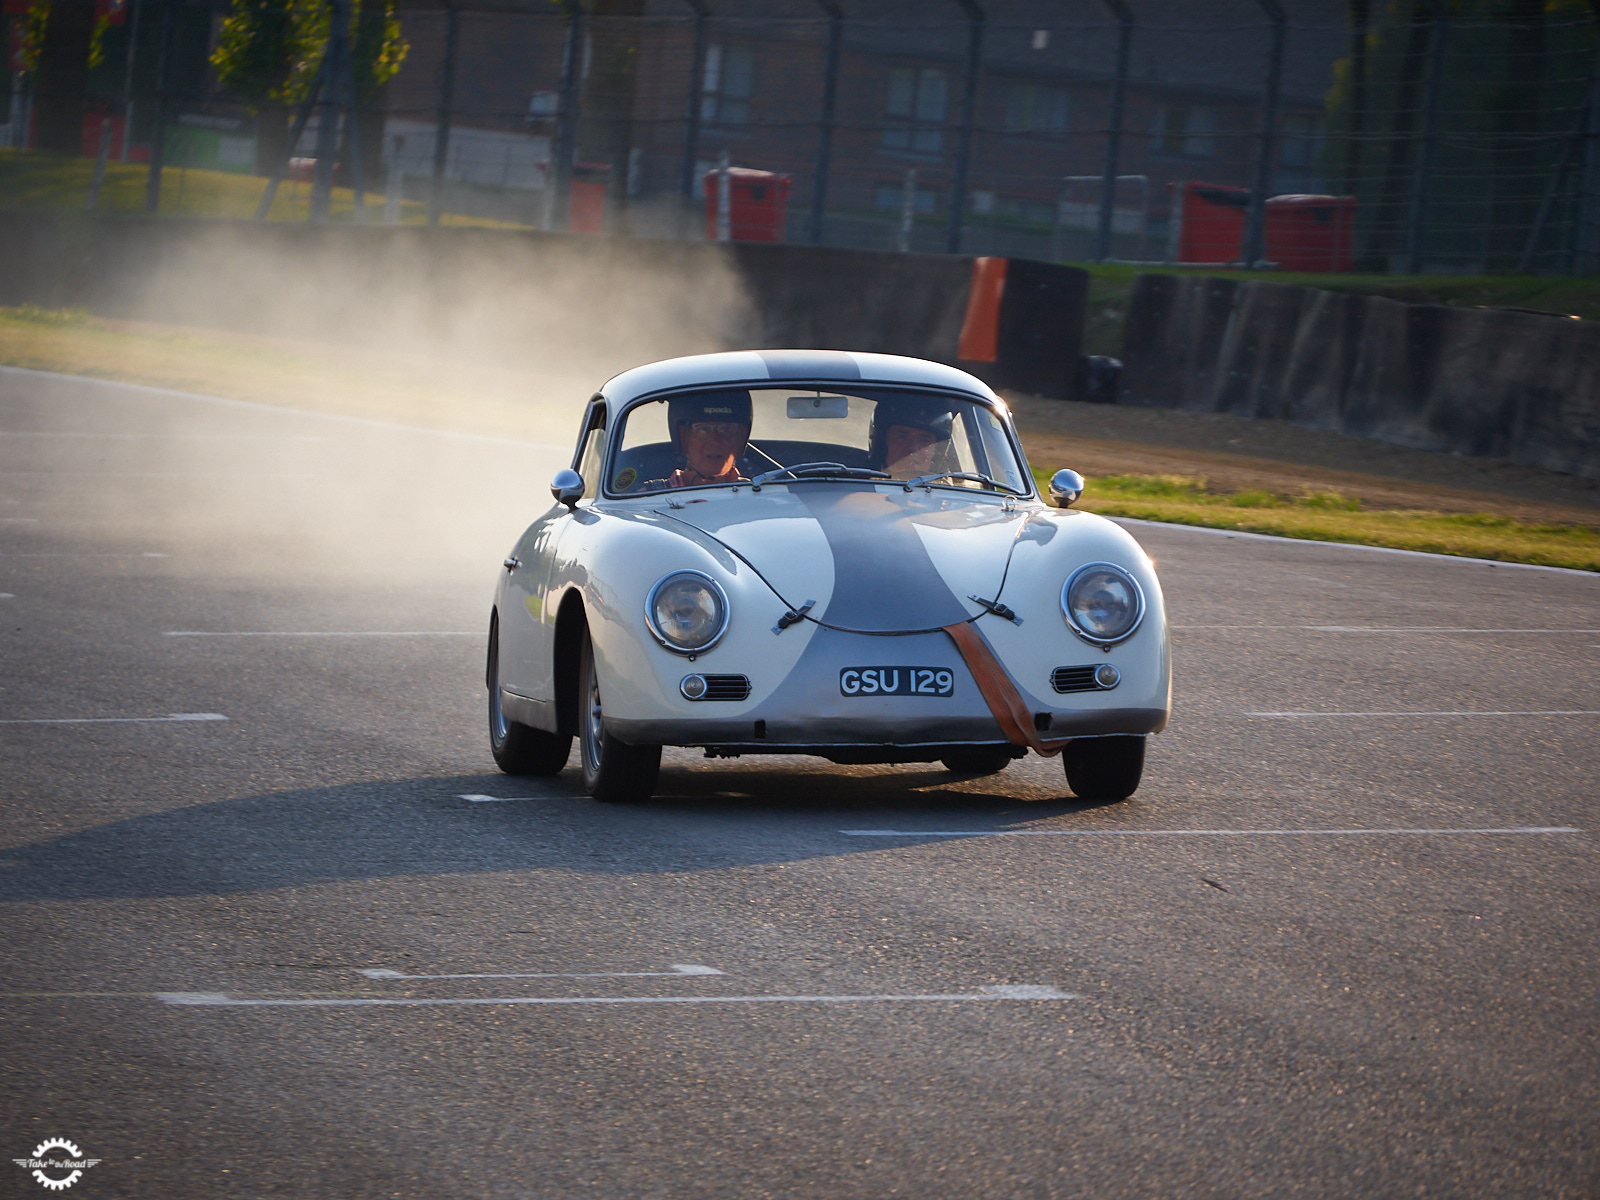 96 Club 40th anniversary Brands Hatch August Track Session